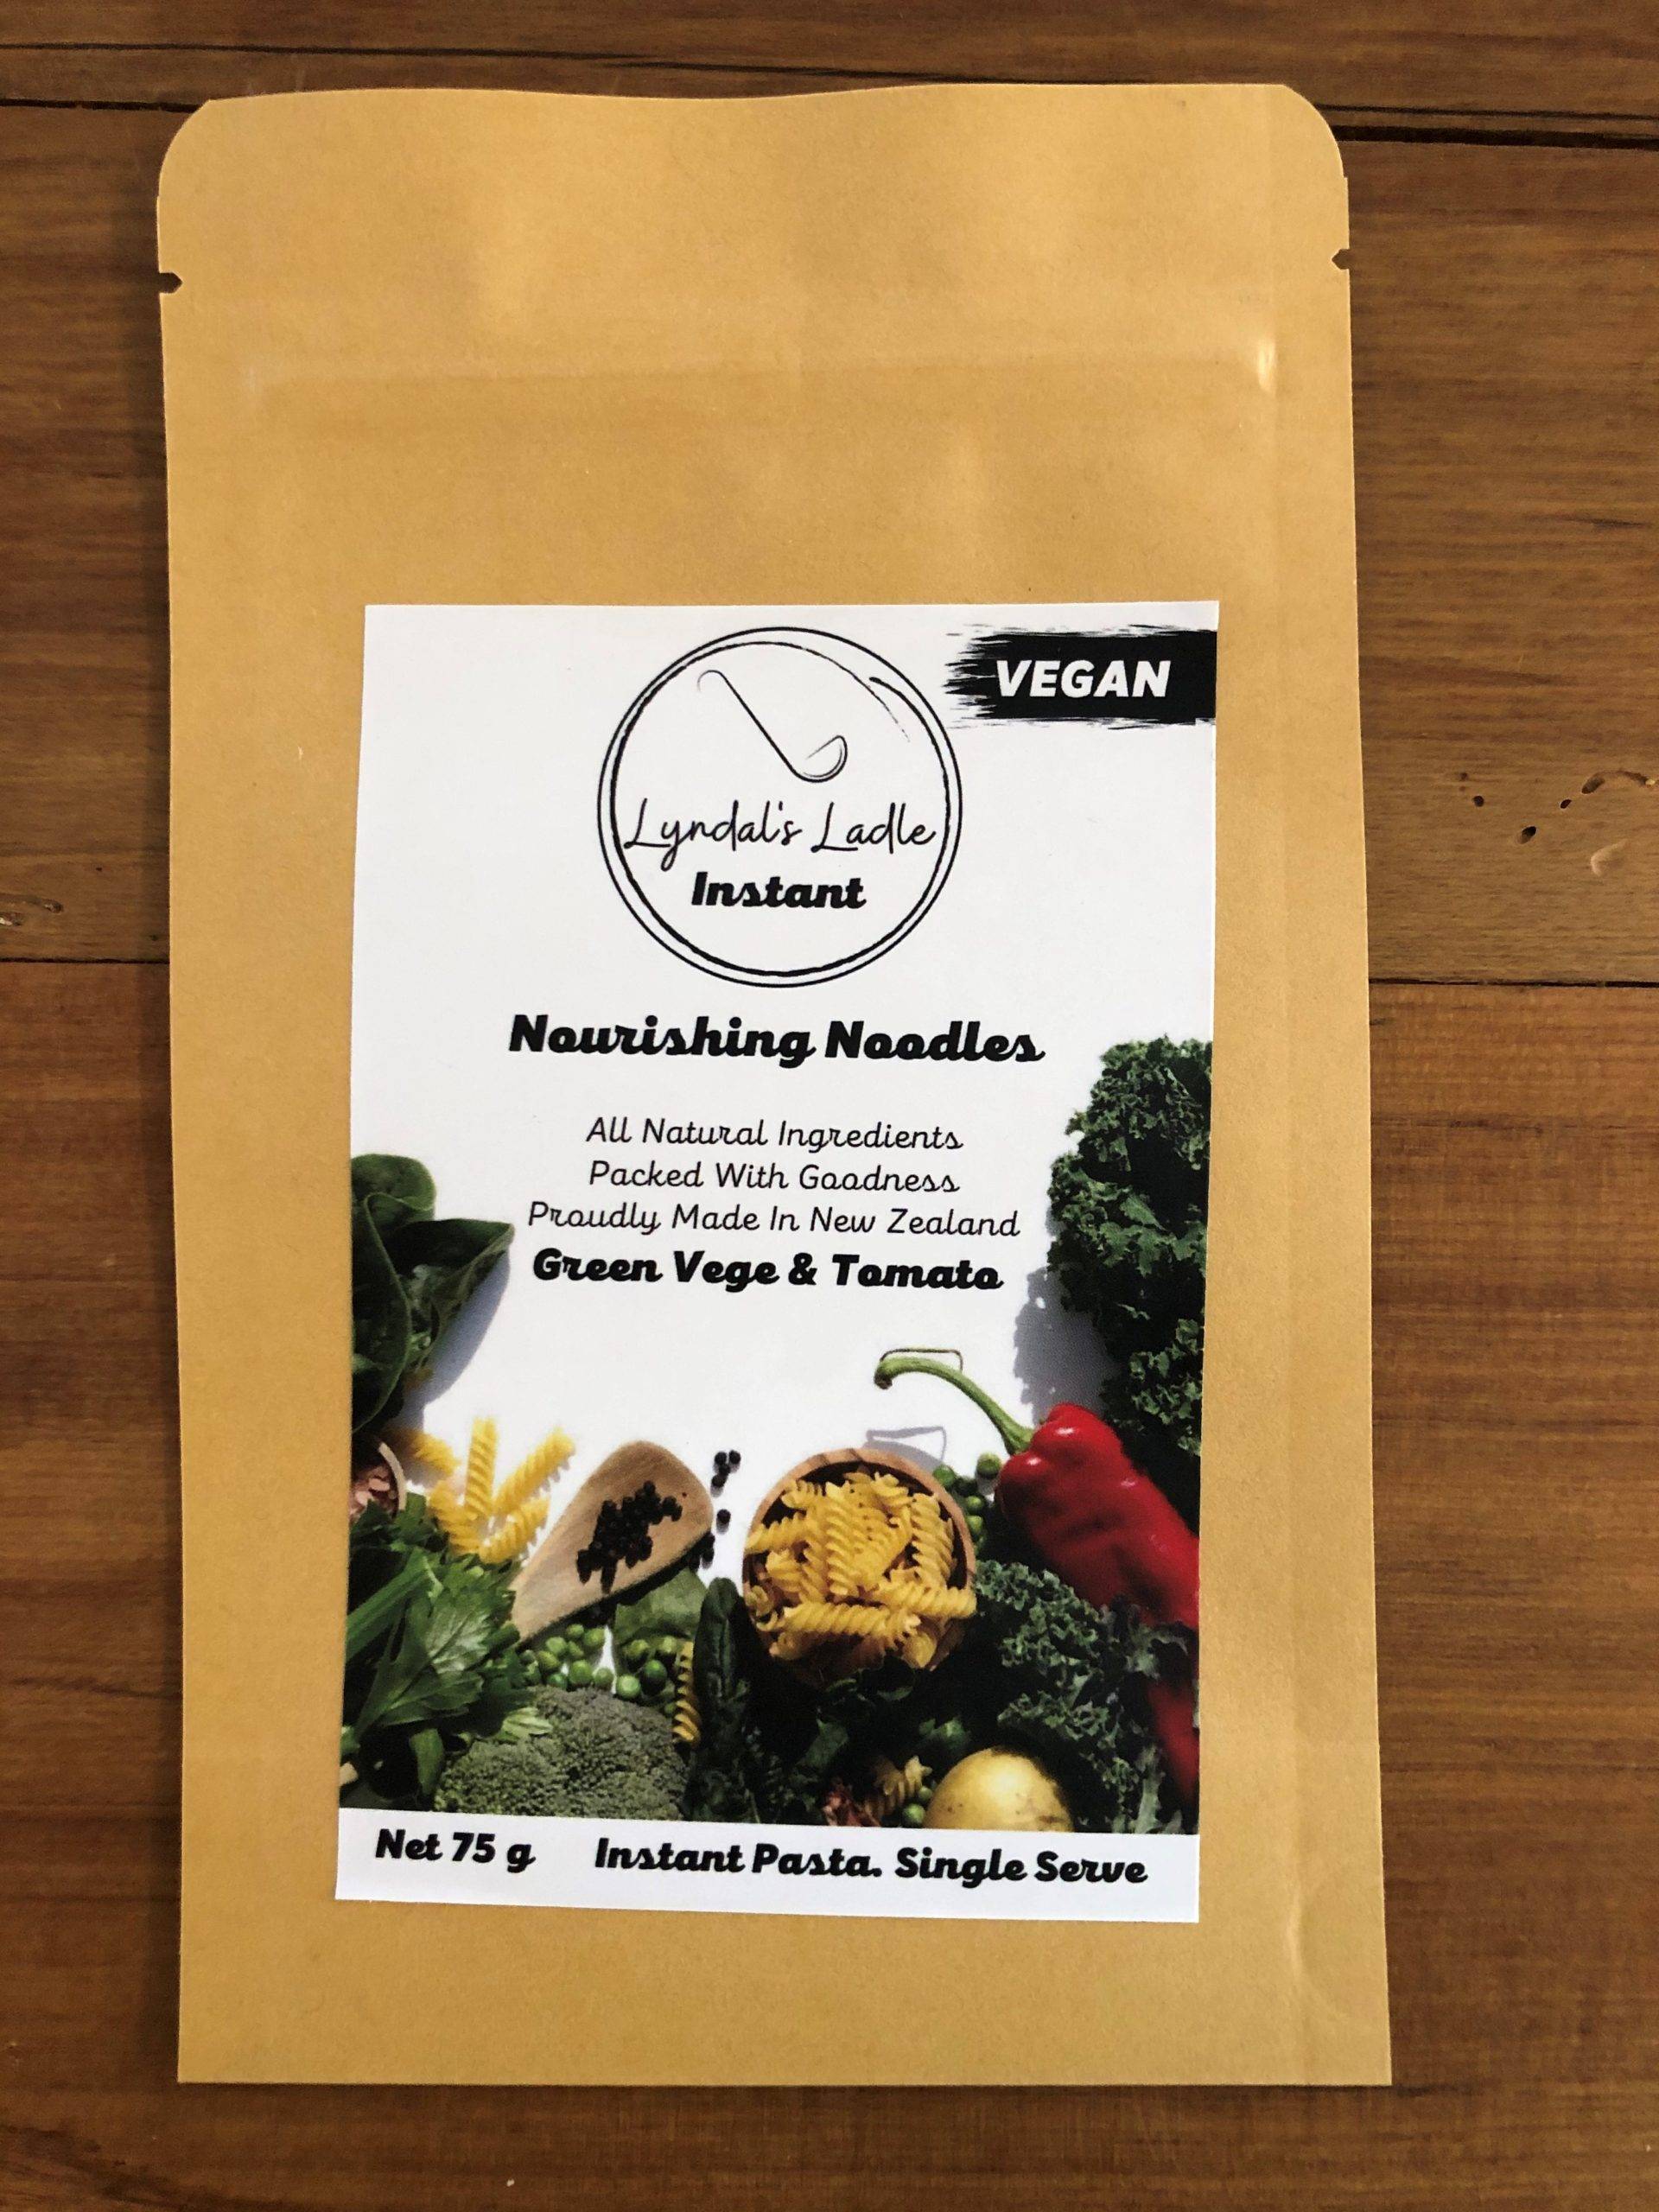 Lyndal’s Ladle Vegan Green Vege & Tomato Nourishing Noodles - Tramping Food and Accessories sold by Venture Outdoors NZ